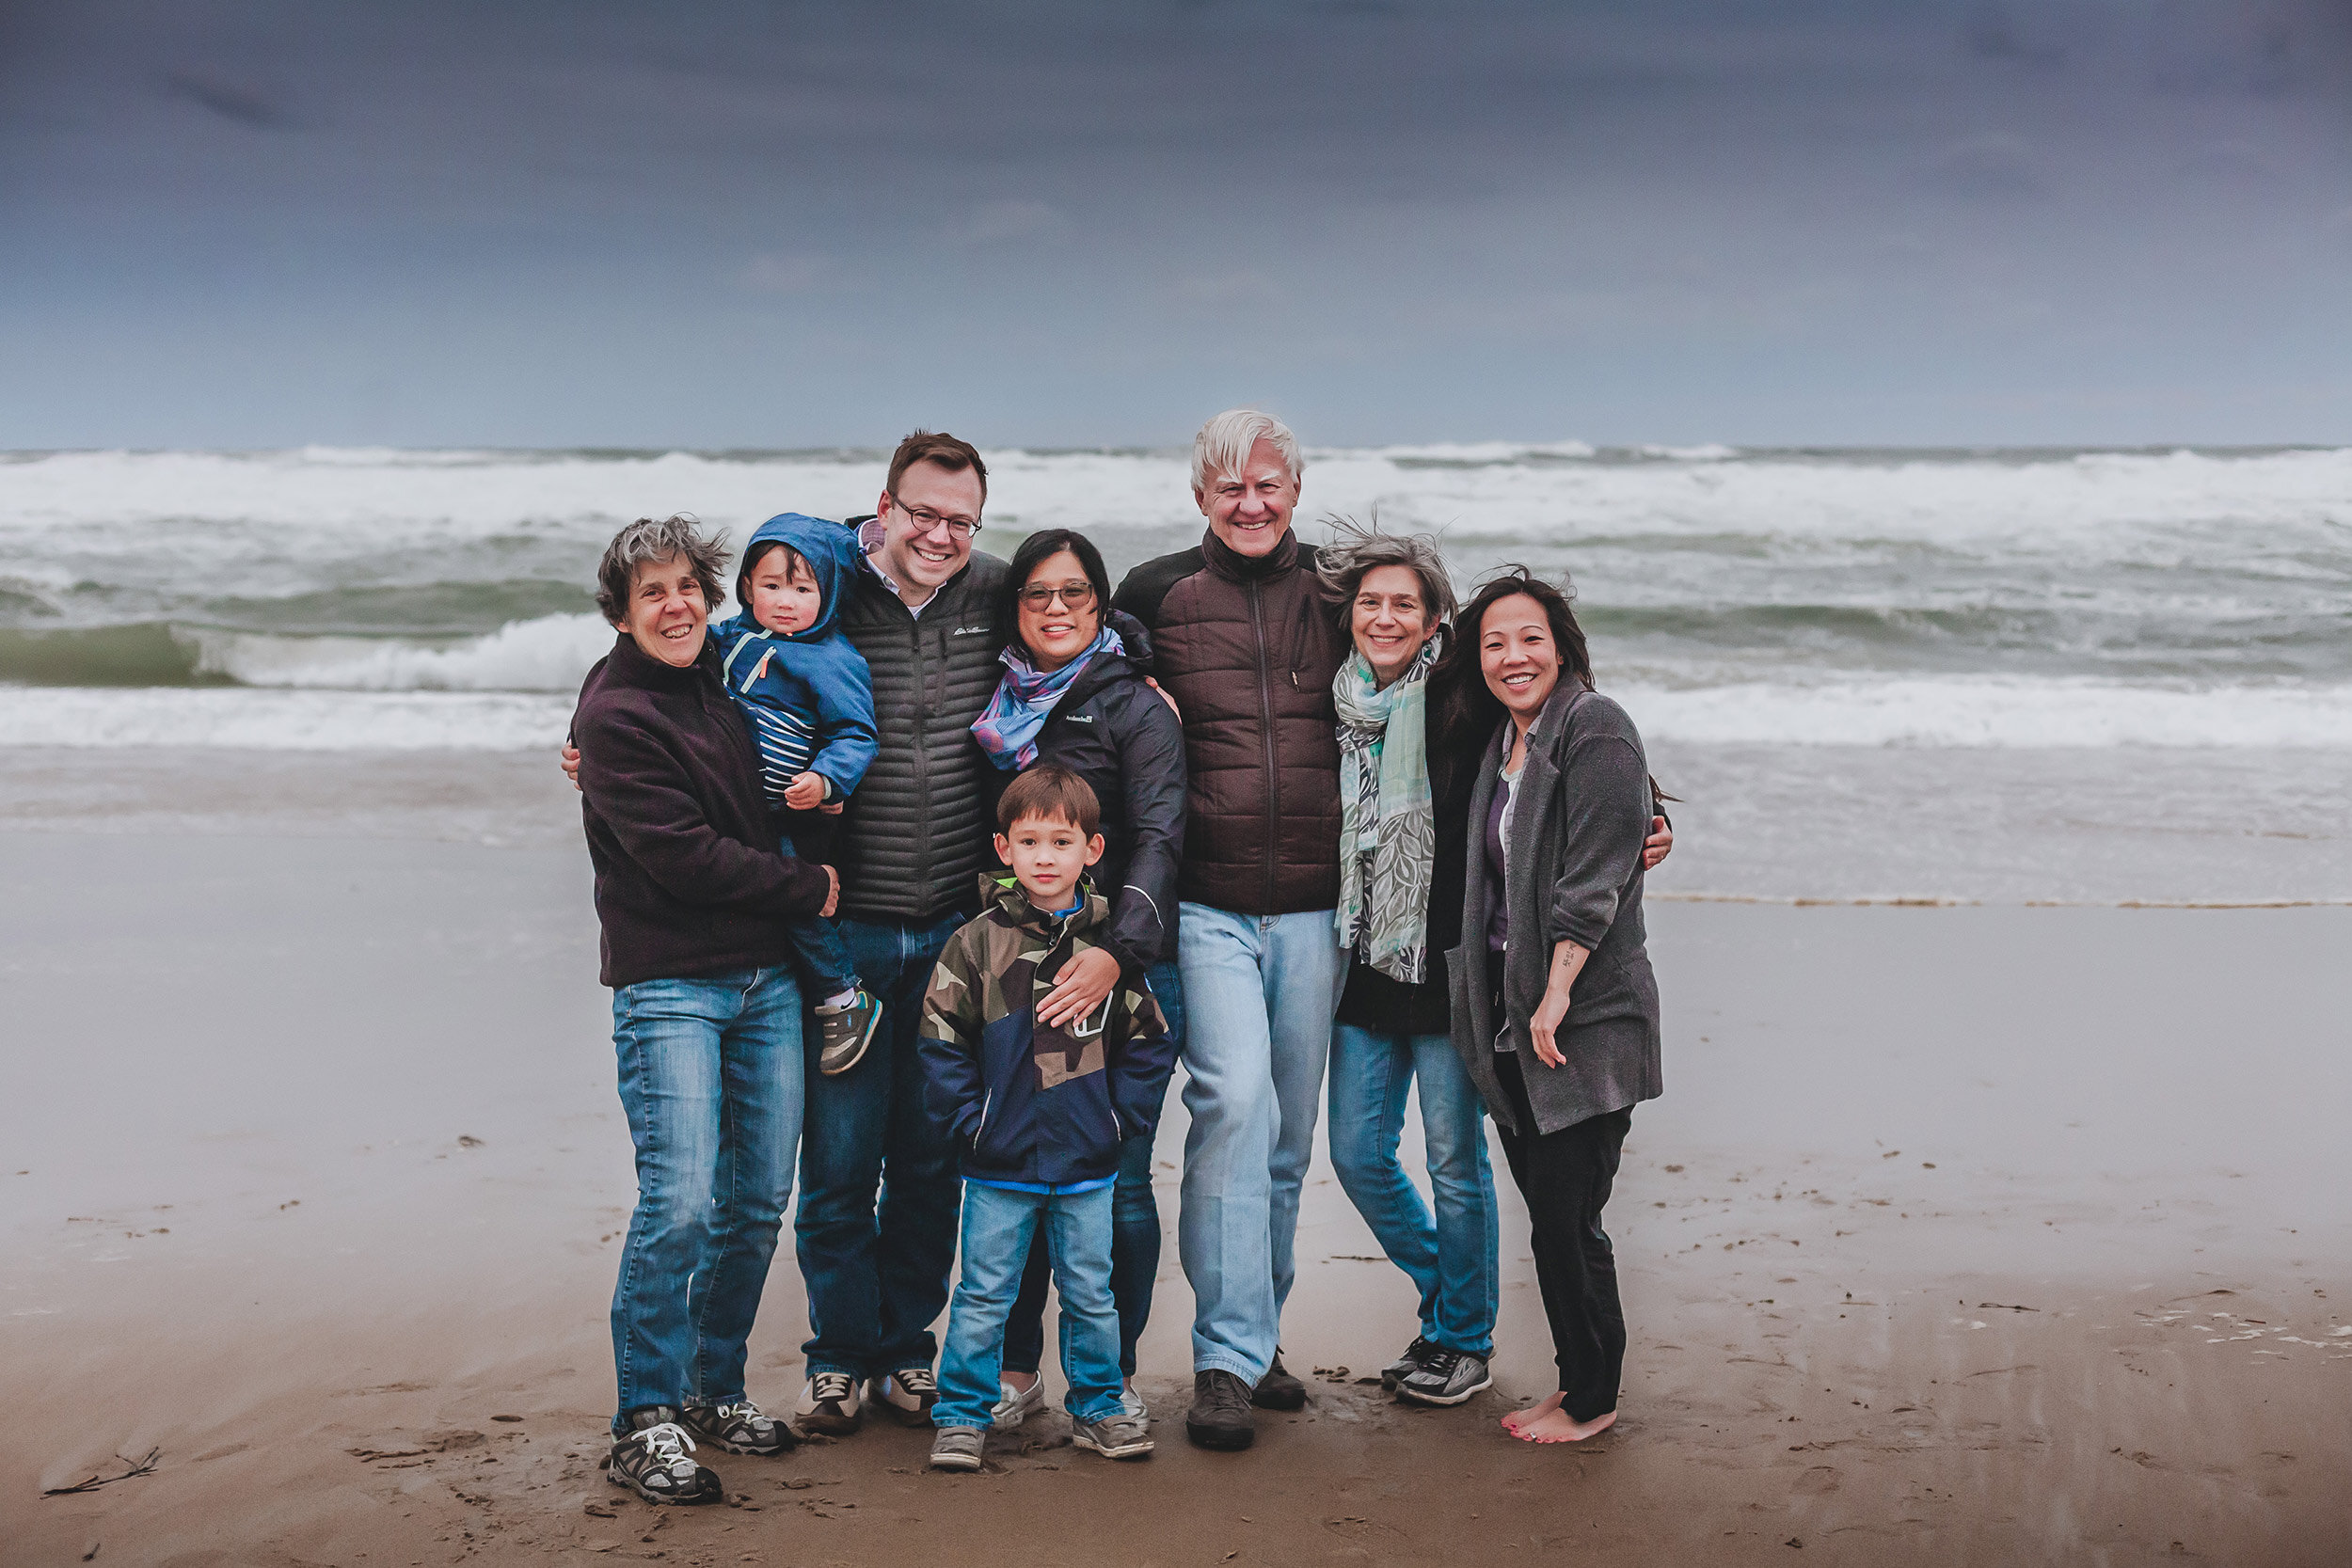 Ipswich MA Family Portrait Session | Stephen Grant Photography